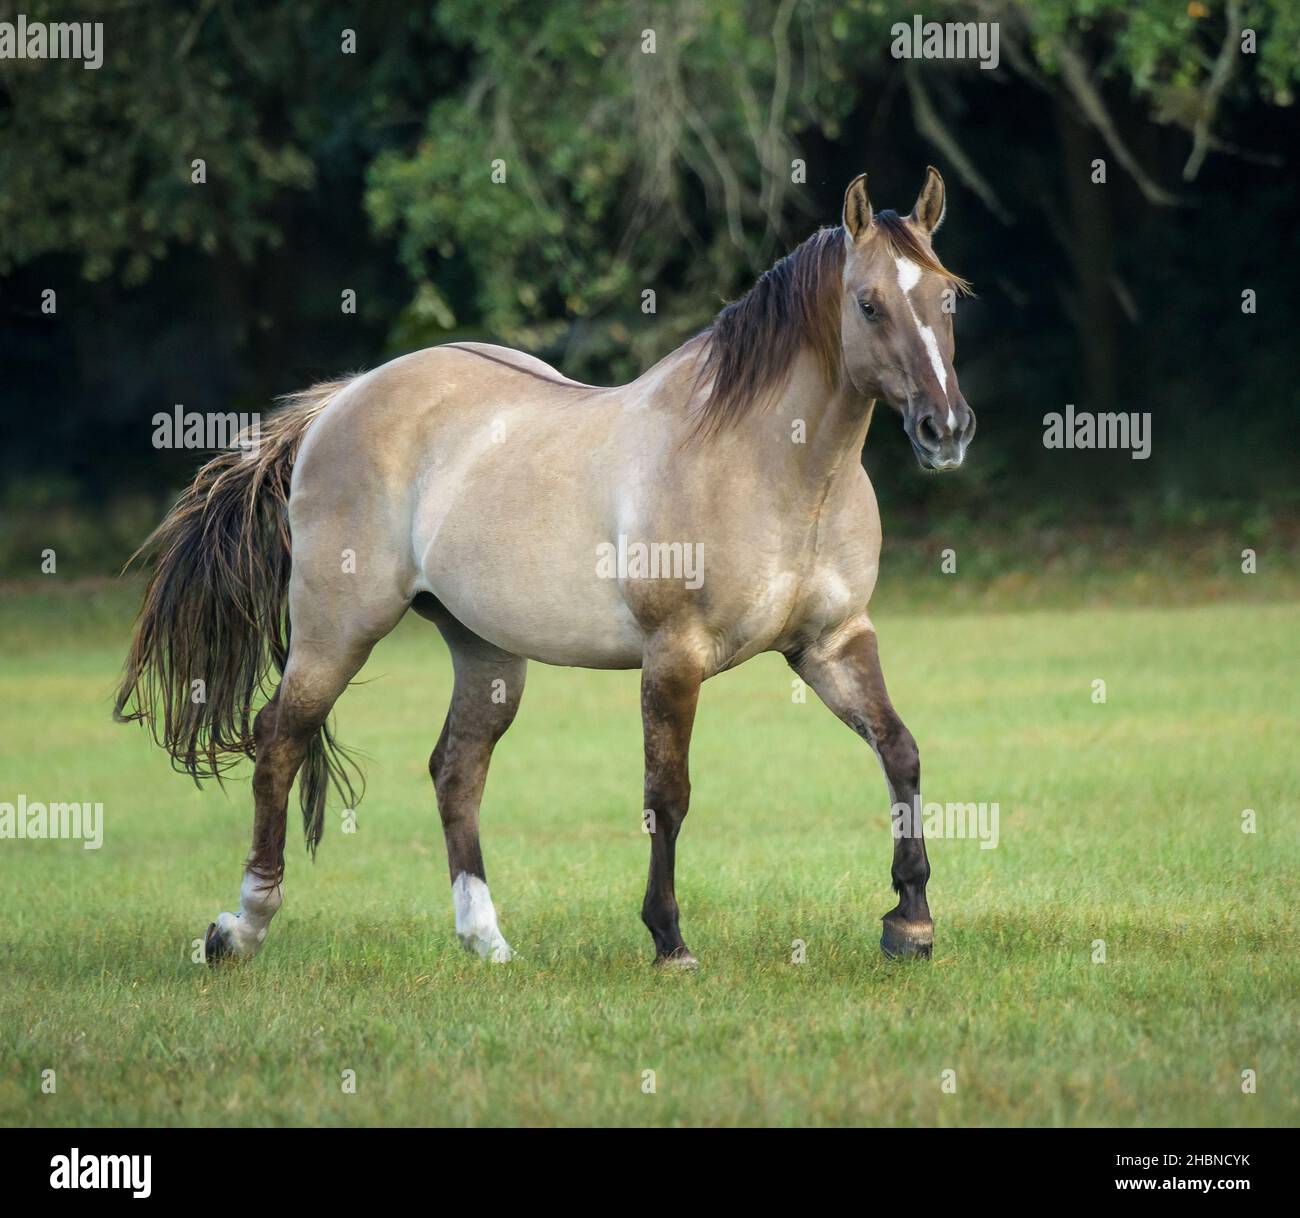 Dun colored horse running in grass Stock Photo